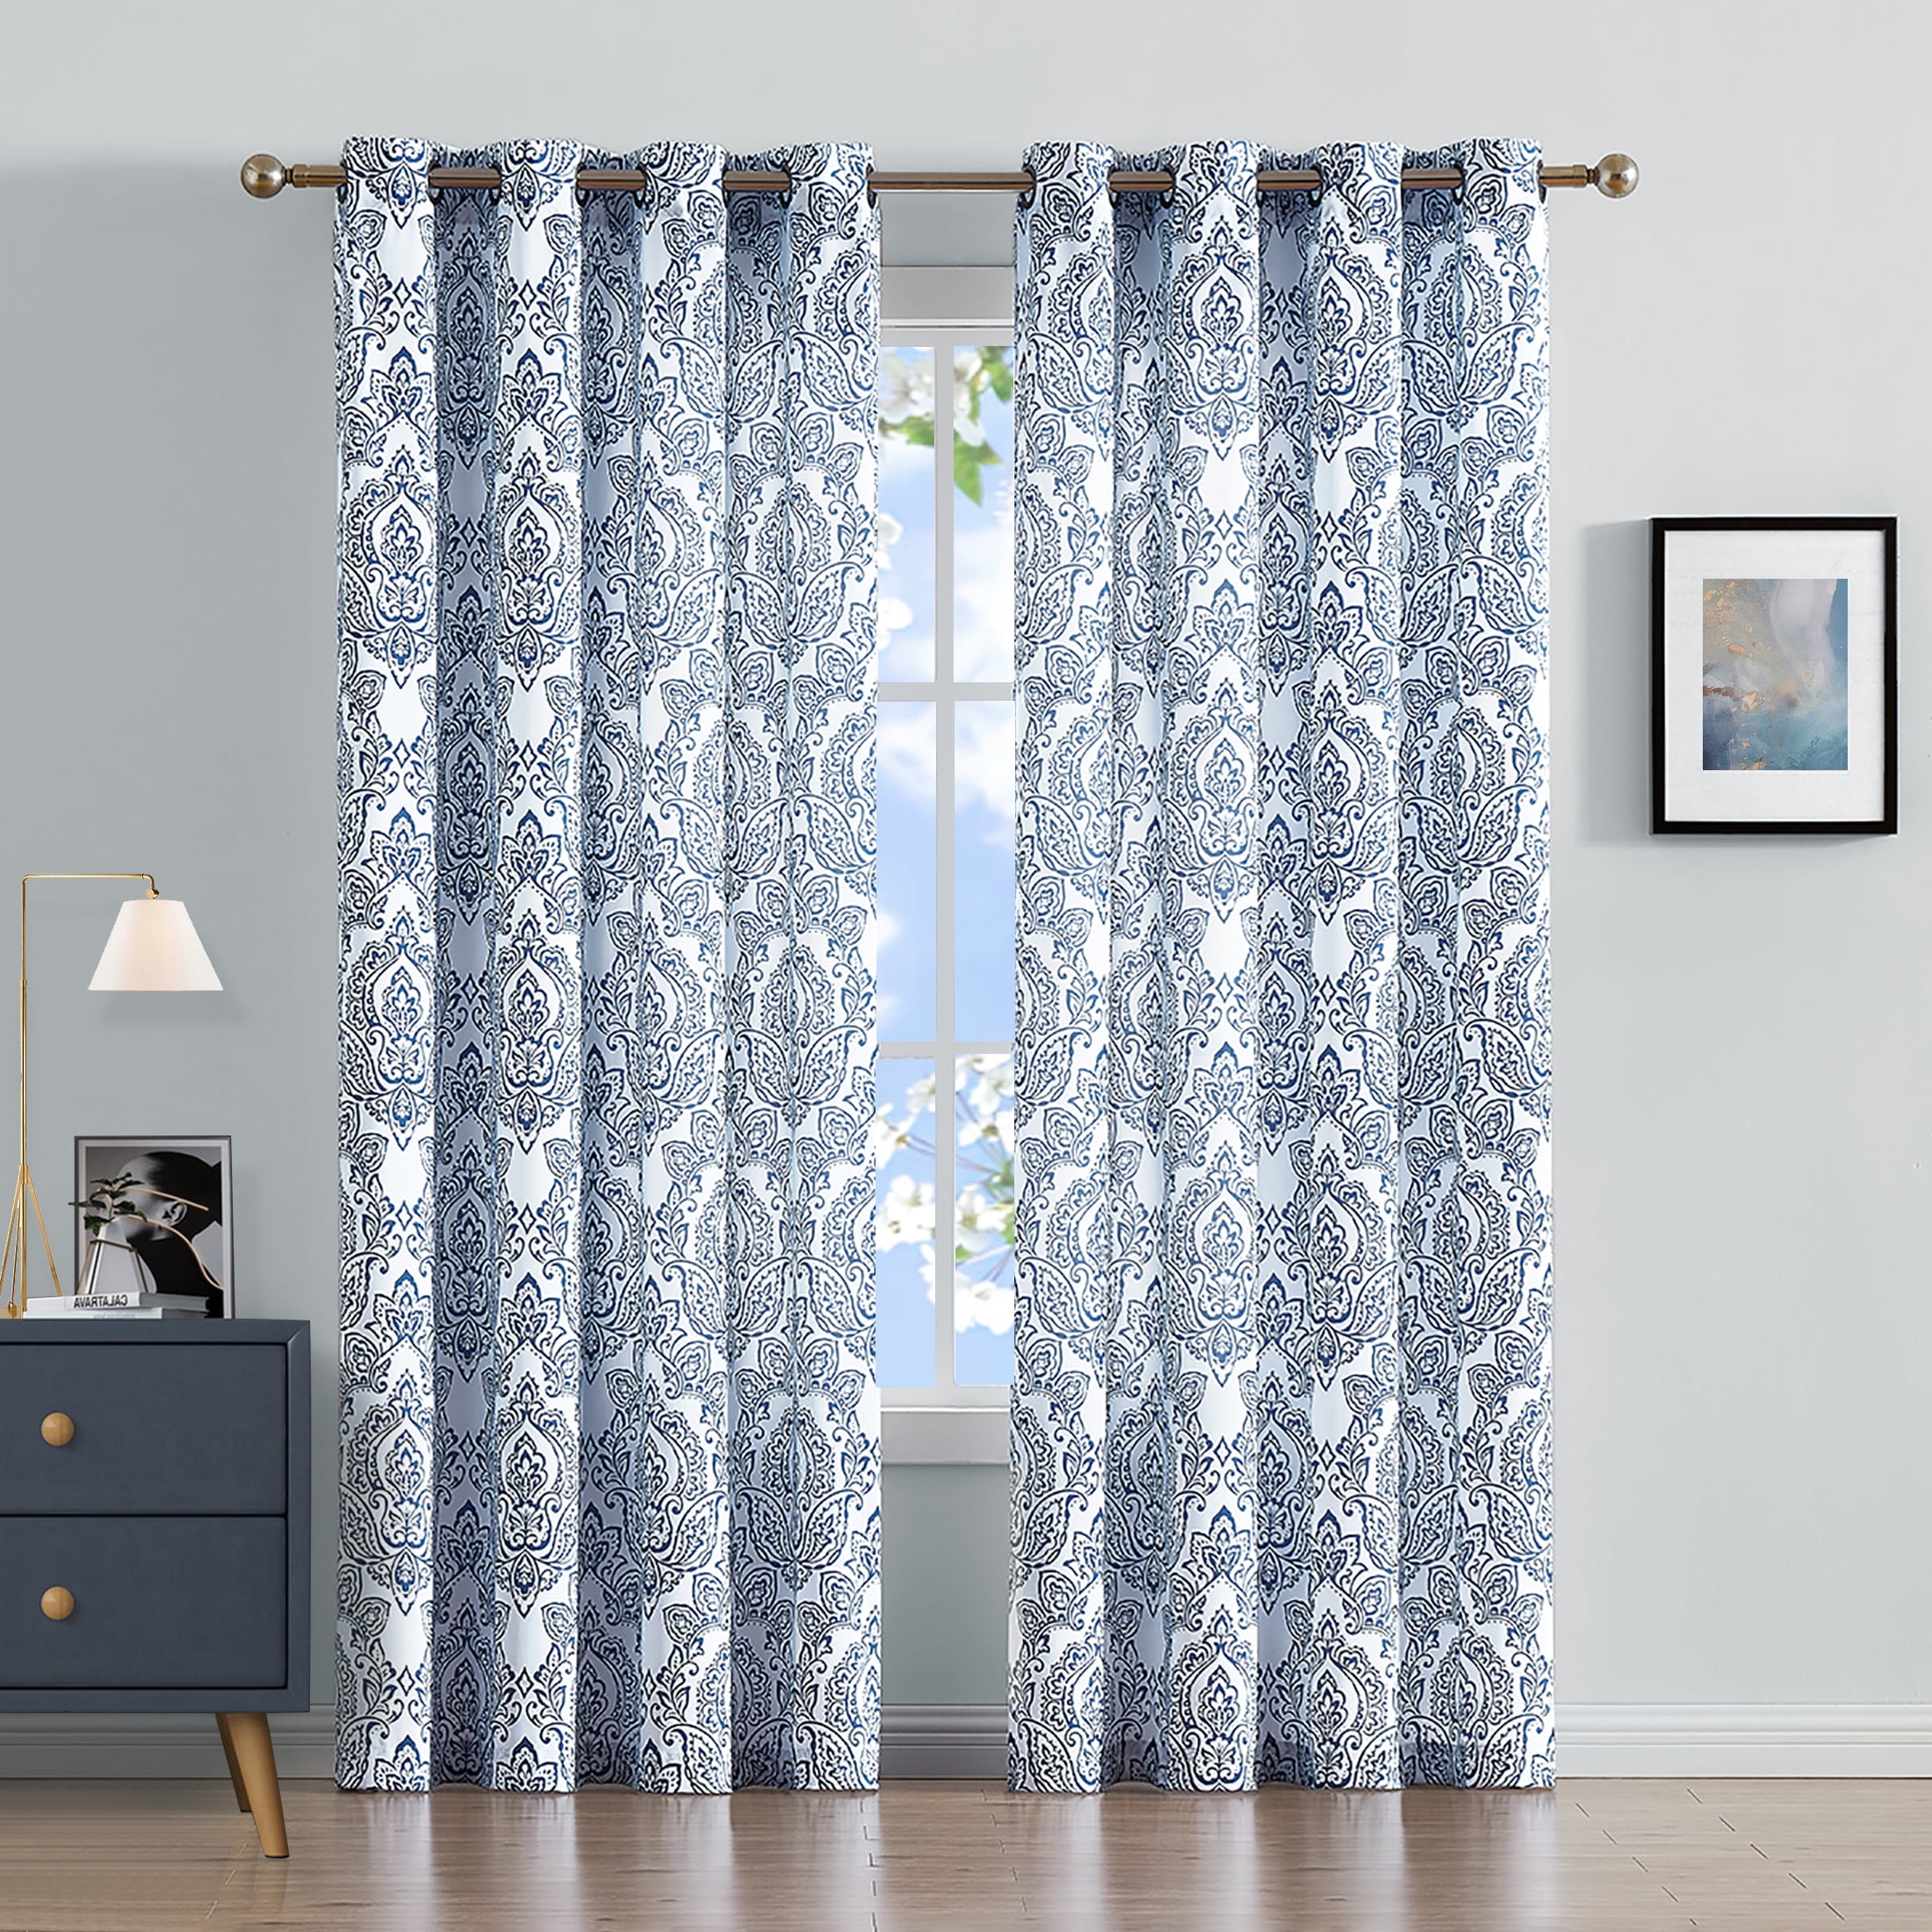 Decoultimatex Print Blue and White Print Curtains Vintage Damask Window ...